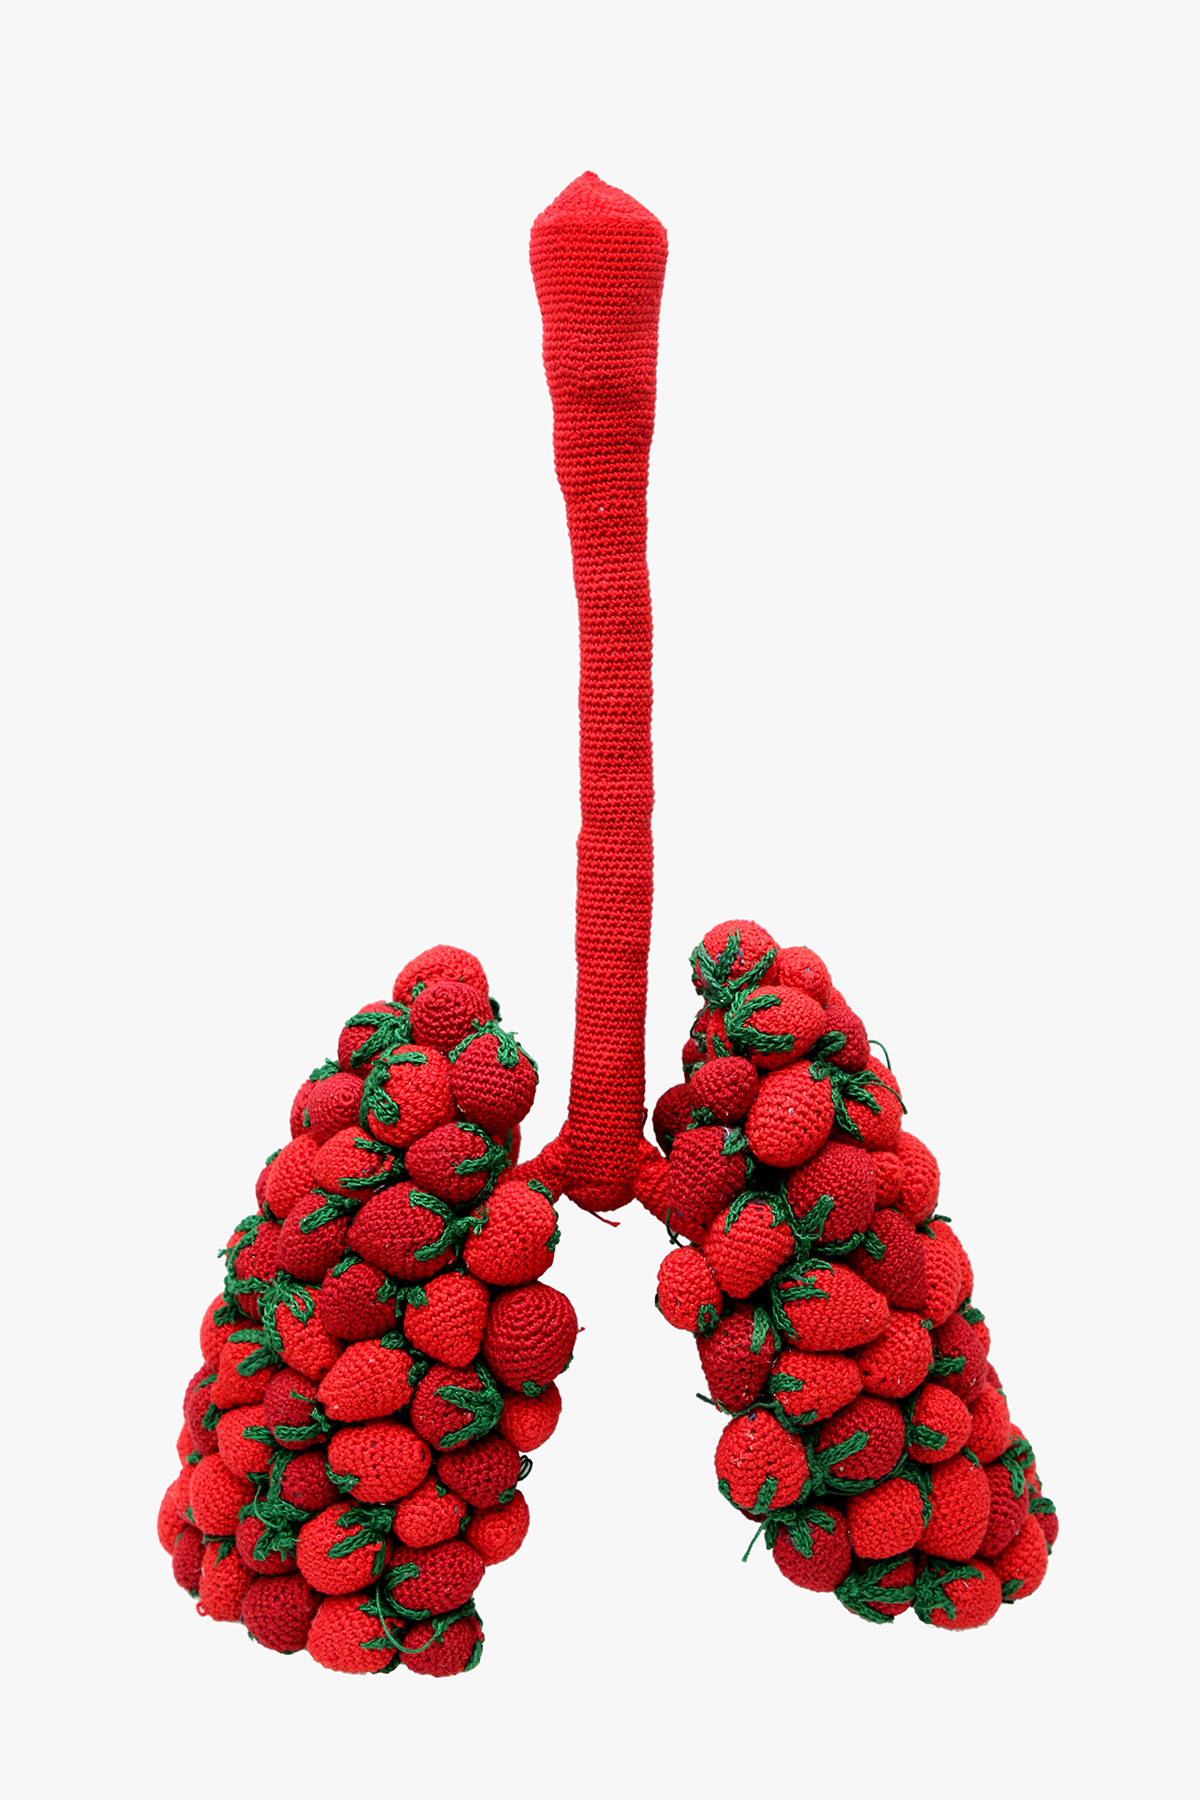 lungs made out of strawberries